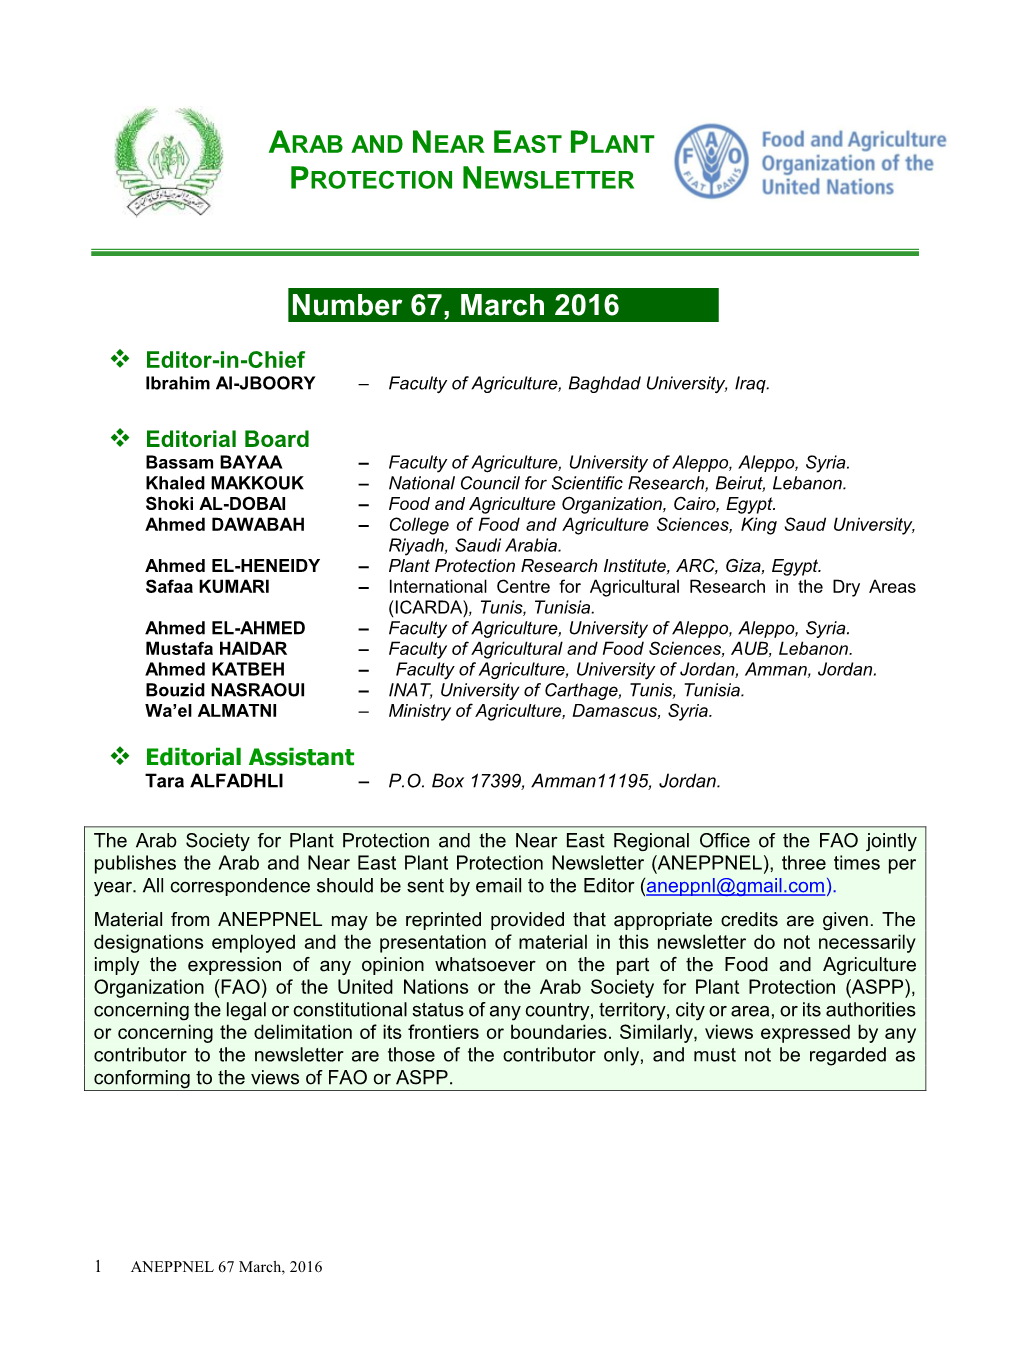 Arab and Near East Plant Protection Newsletter